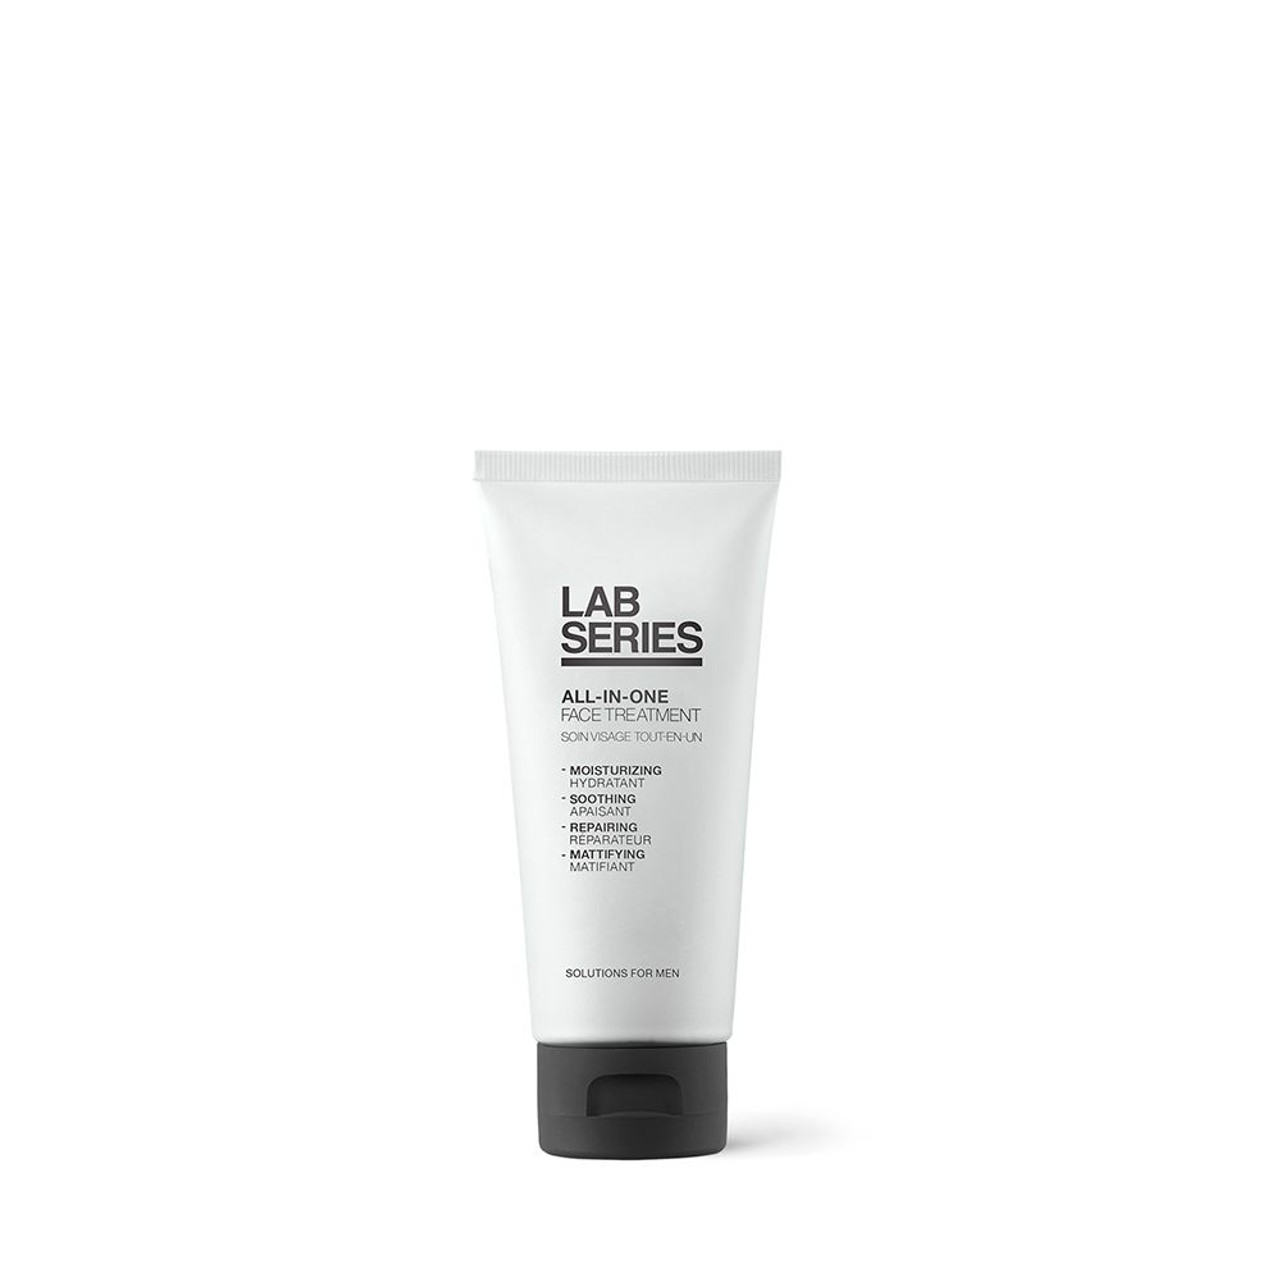 Lab Series - All-In-One Face Treatment 3.4 oz. - Beauty Bridge